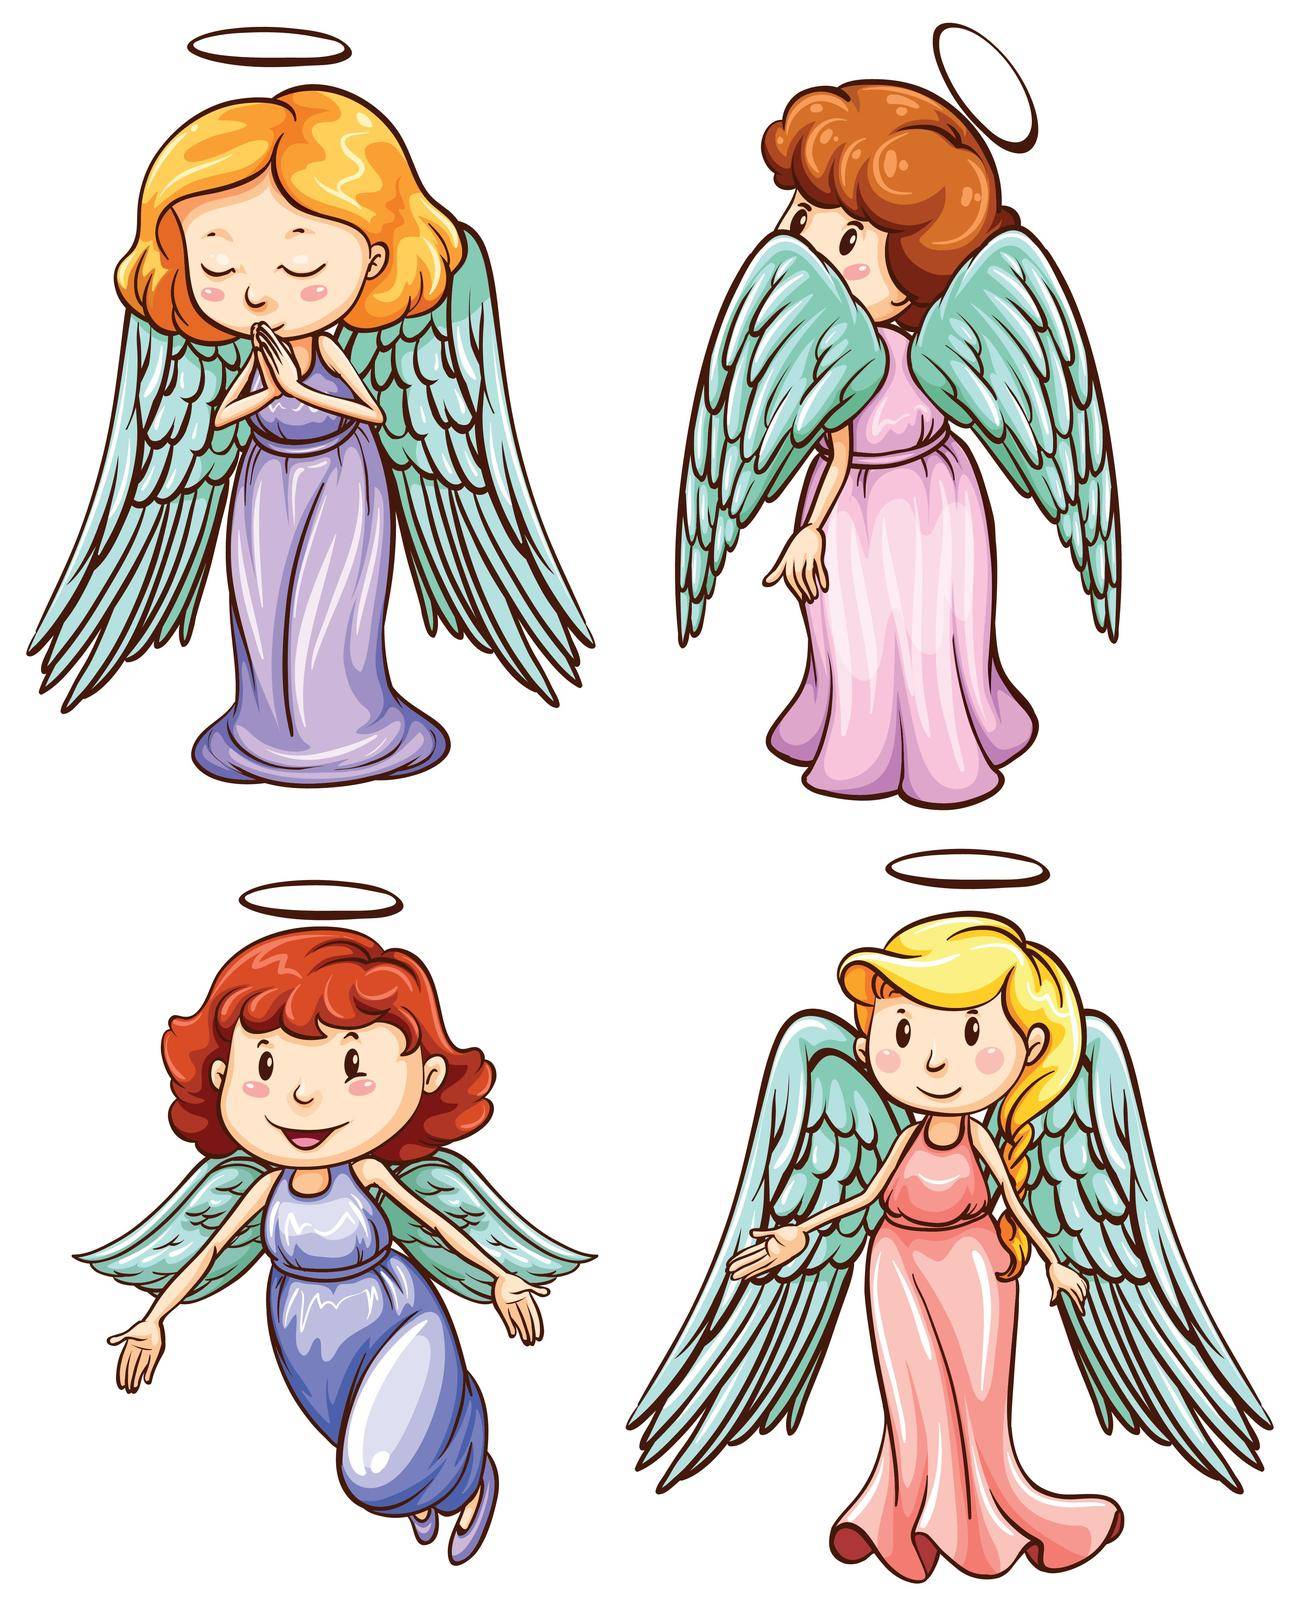 Illustration of the simple sketches of angels on a white background